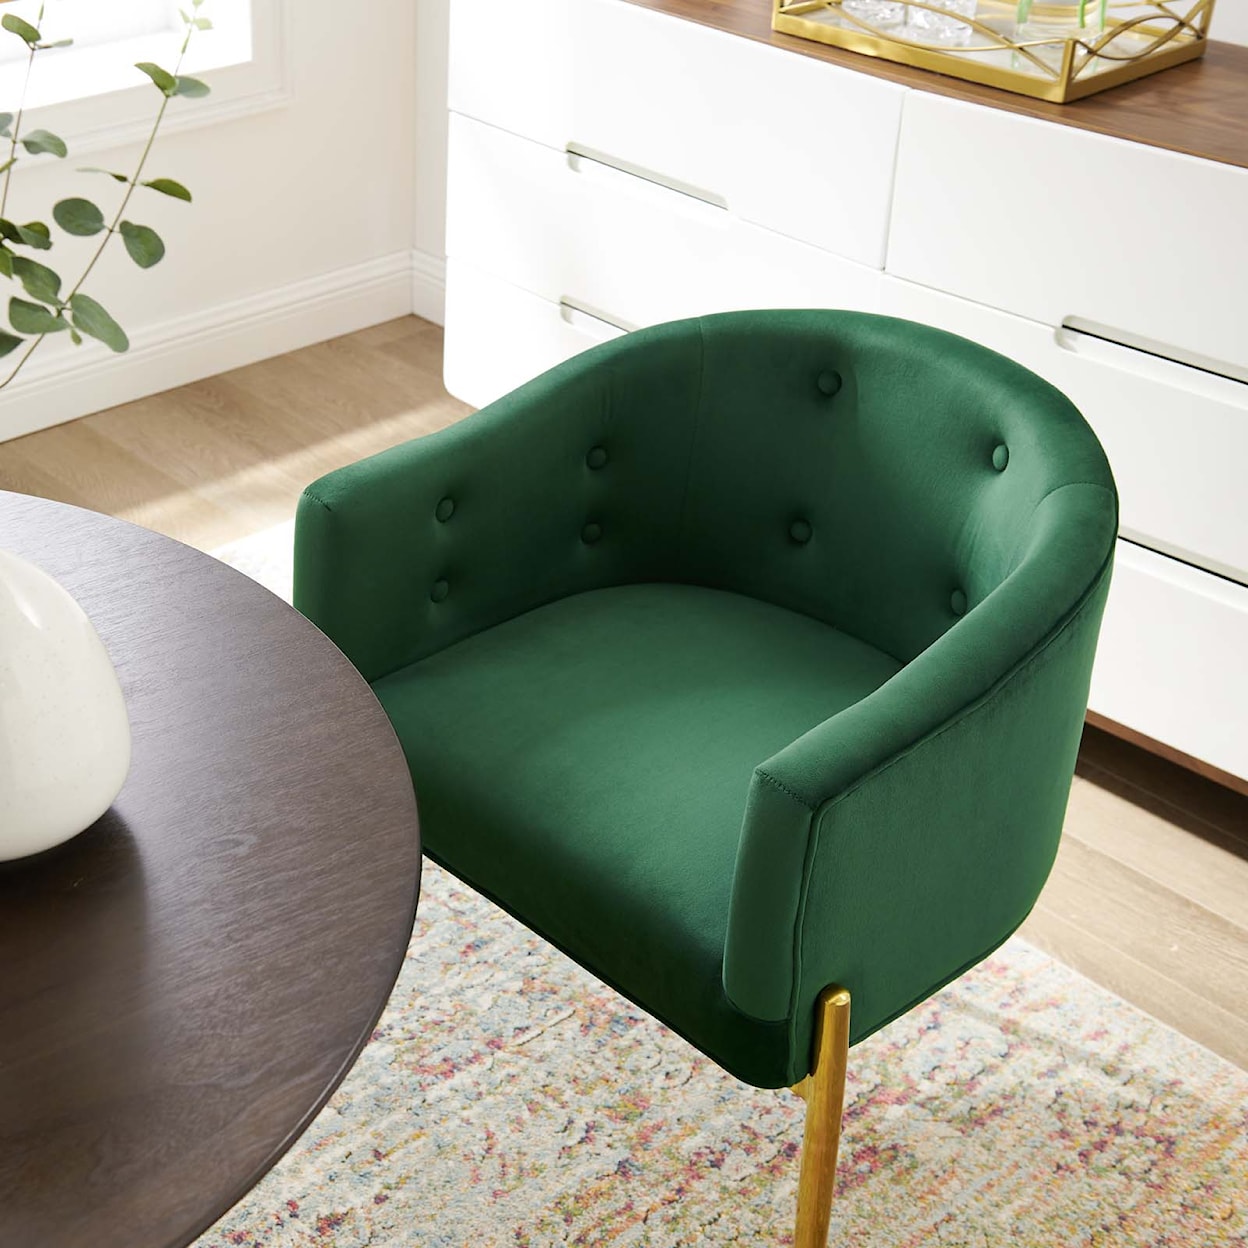 Modway Savour Accent Chairs